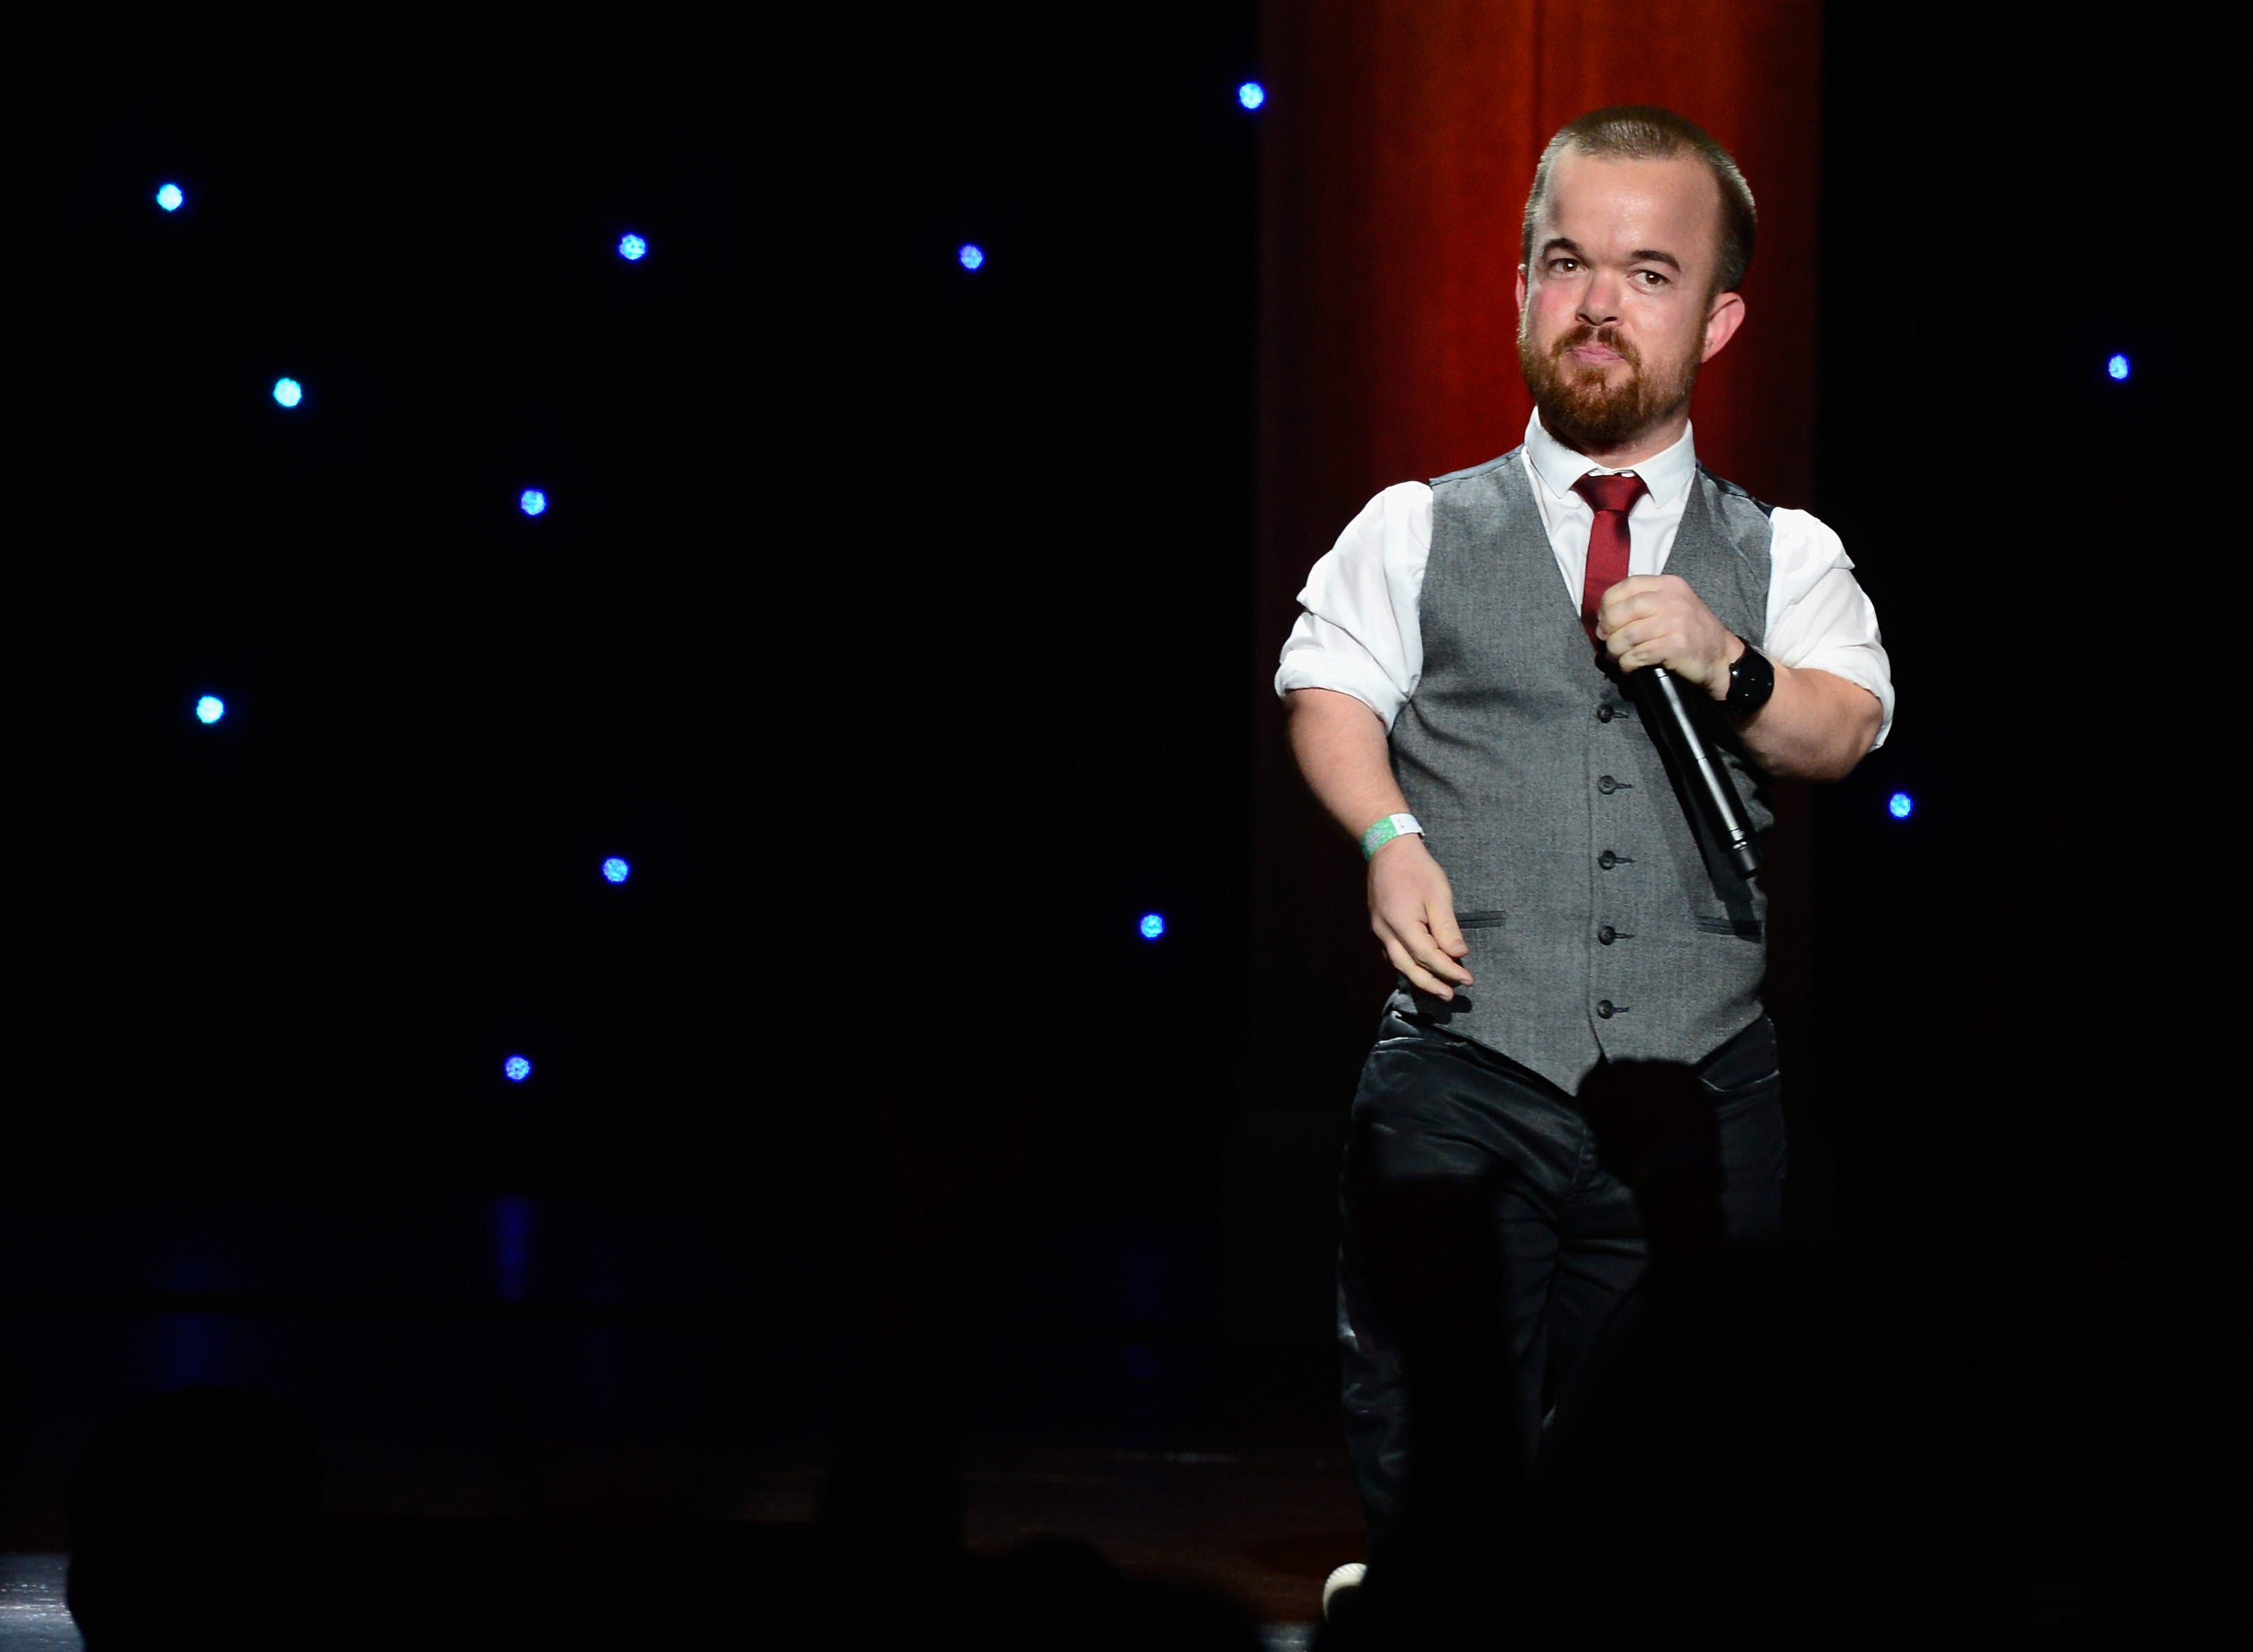 Brad Williams Weighs In On Comedy Ahead Of Palm Springs Area Show